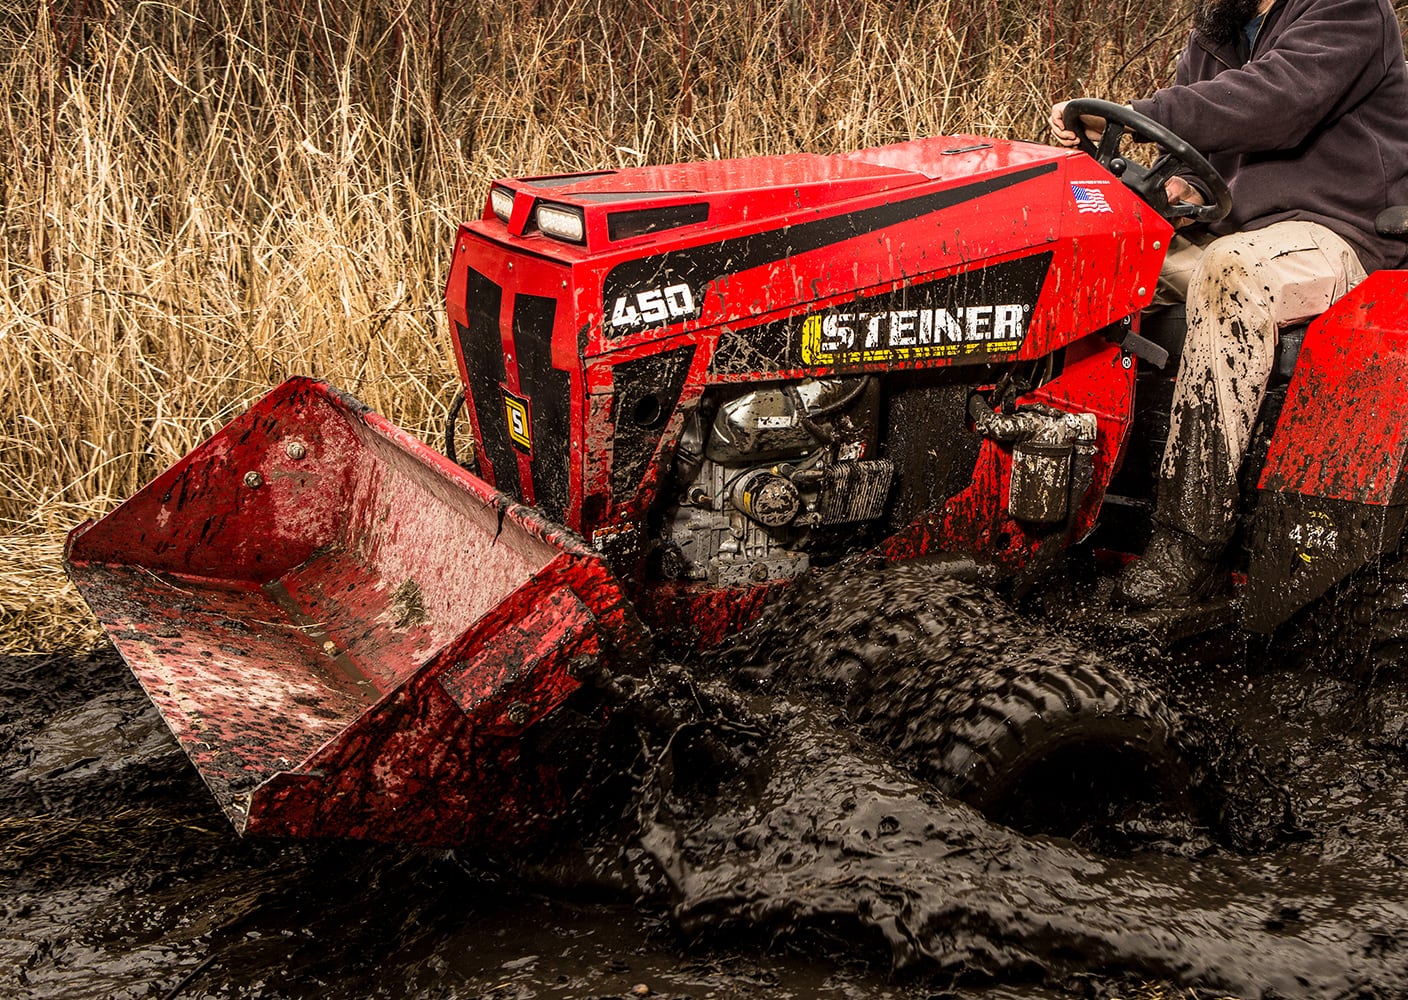 On the Field: Steiner Tractors & Attachments